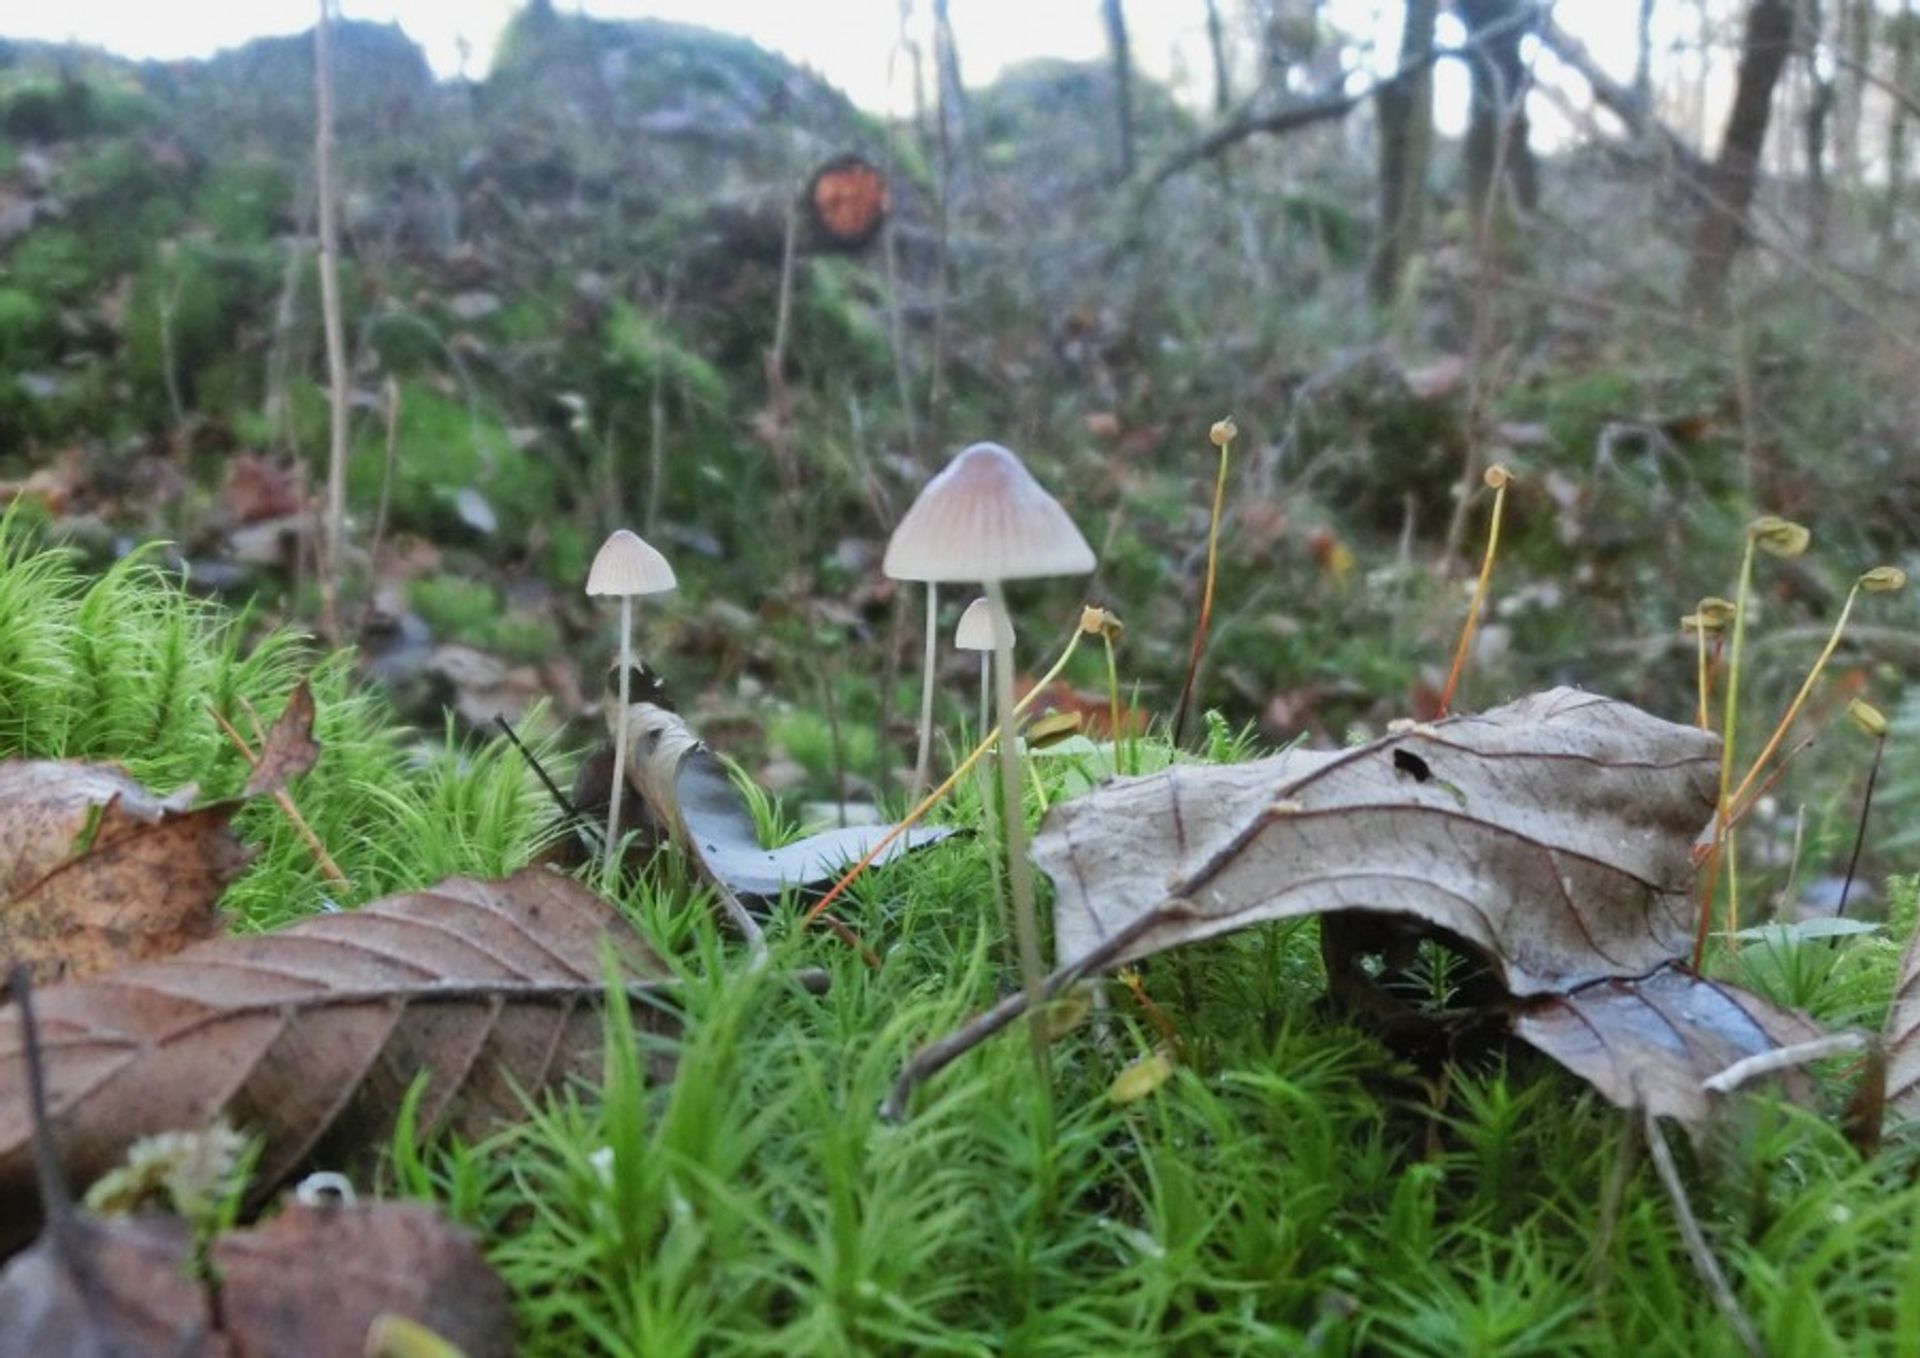 Thin mushrooms growing from the soil in the forest with leafs around.